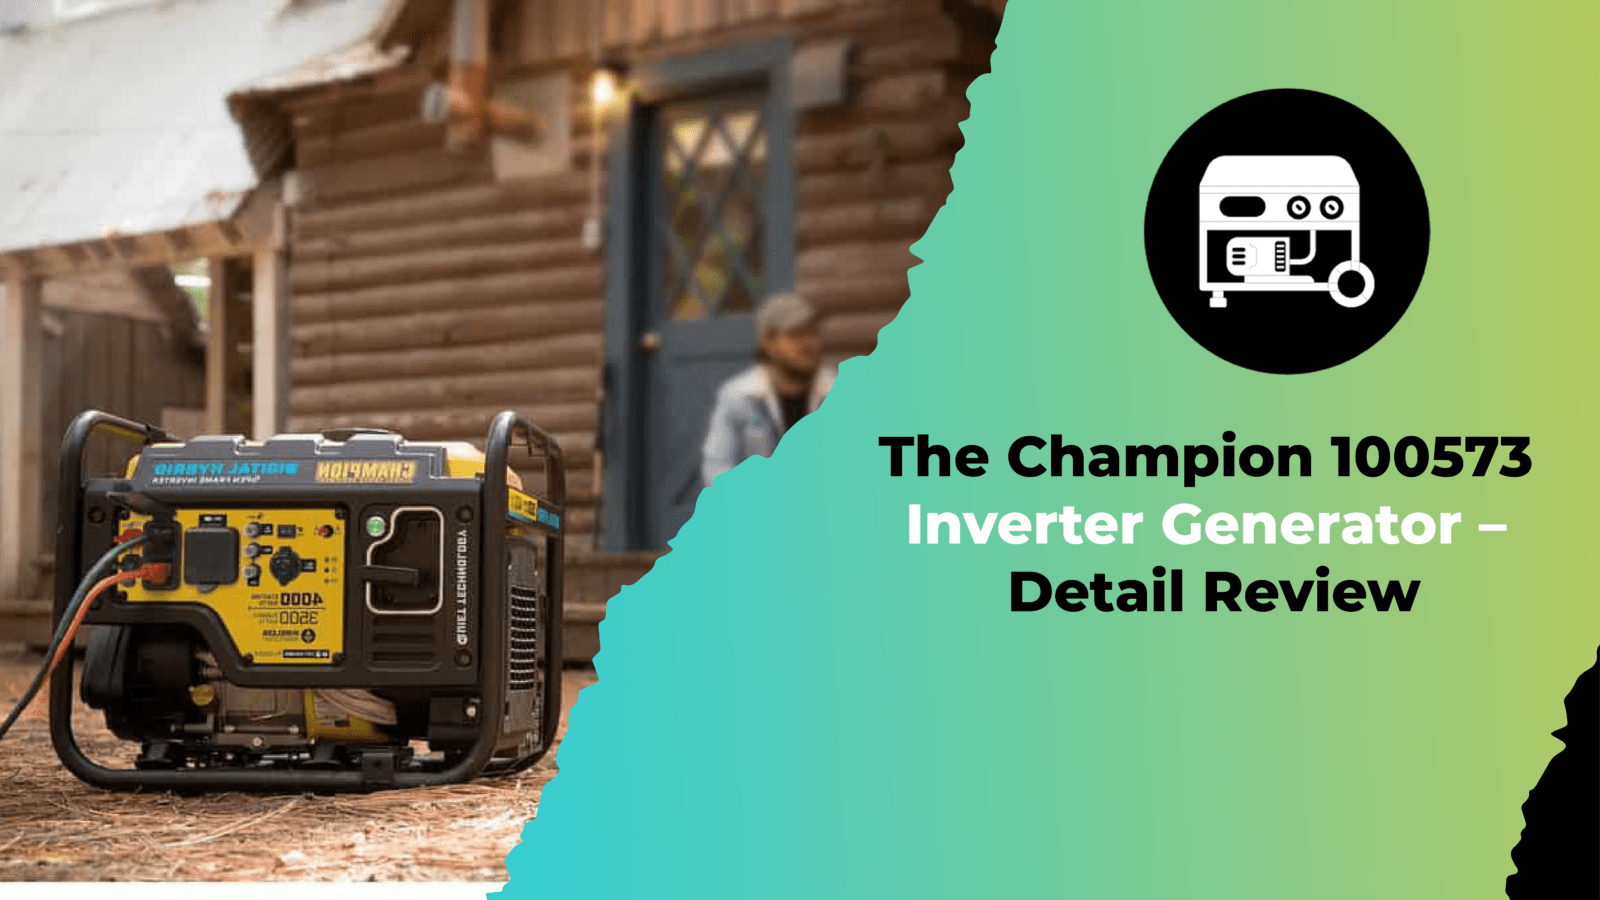 The Champion 100573 Inverter Generator – Detail Review